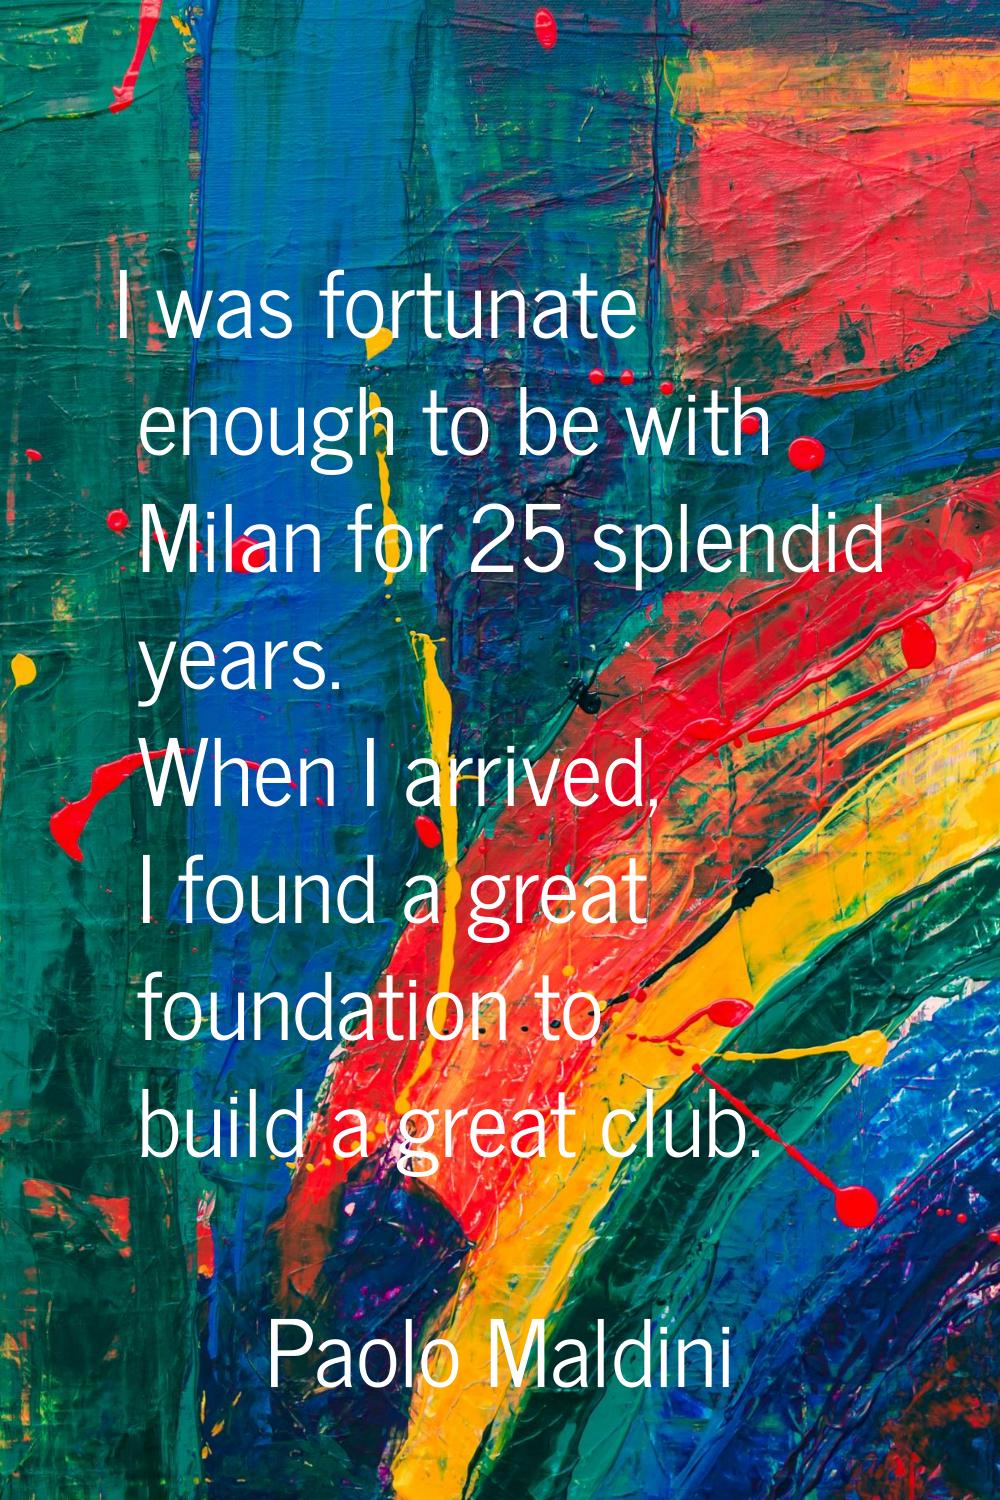 I was fortunate enough to be with Milan for 25 splendid years. When I arrived, I found a great foun